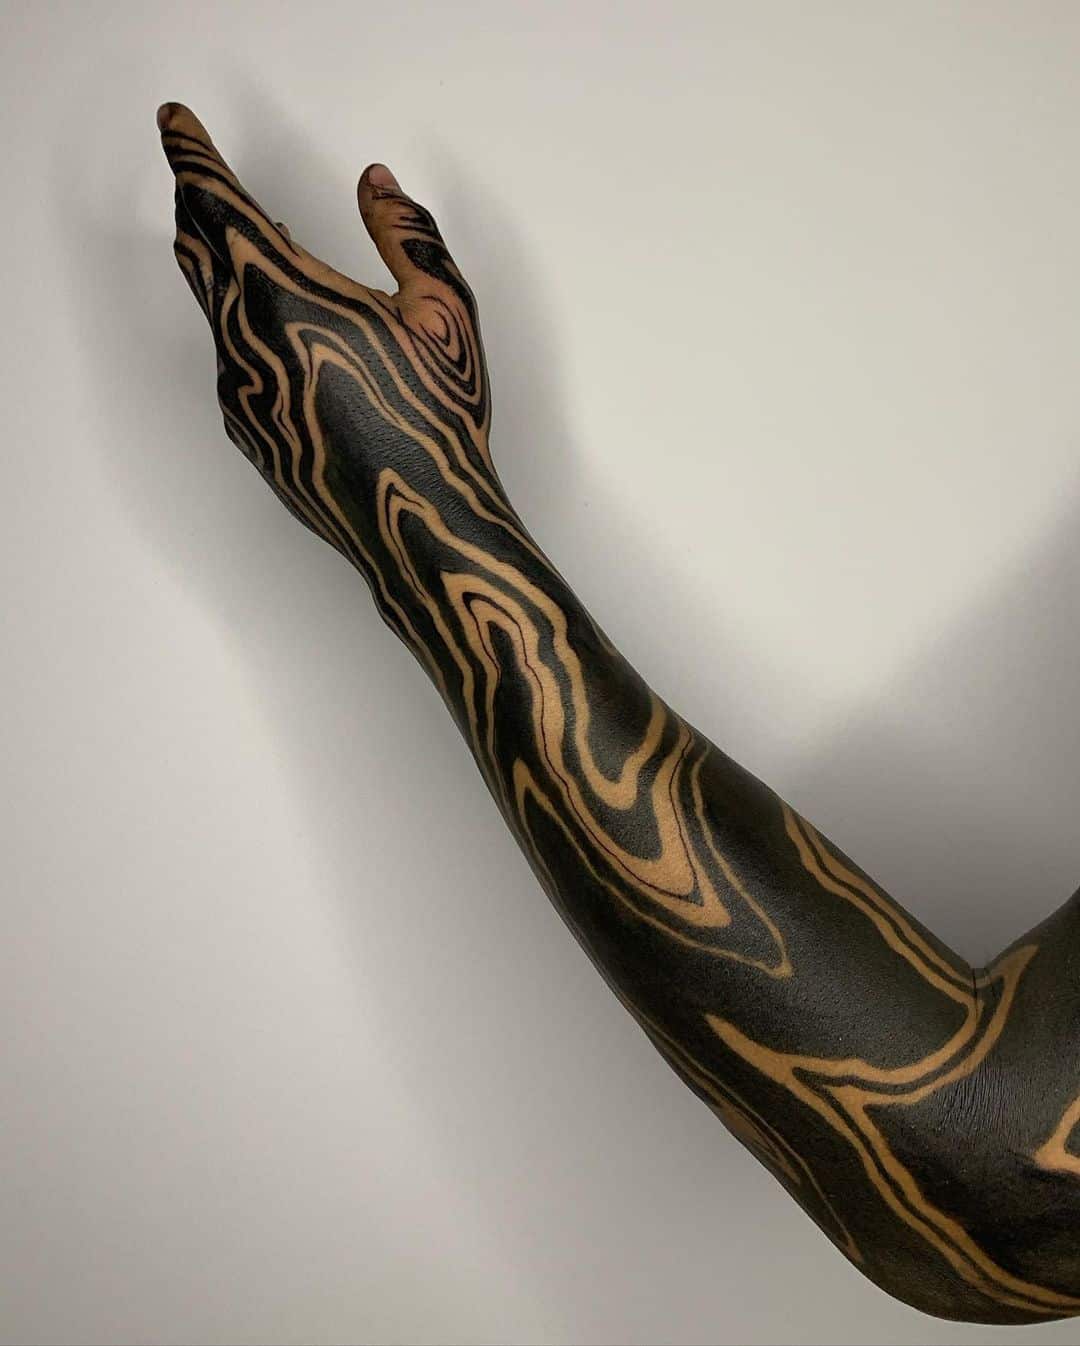 50 Beautiful Blackout Tattoos With White Ink For Perfect Contrast